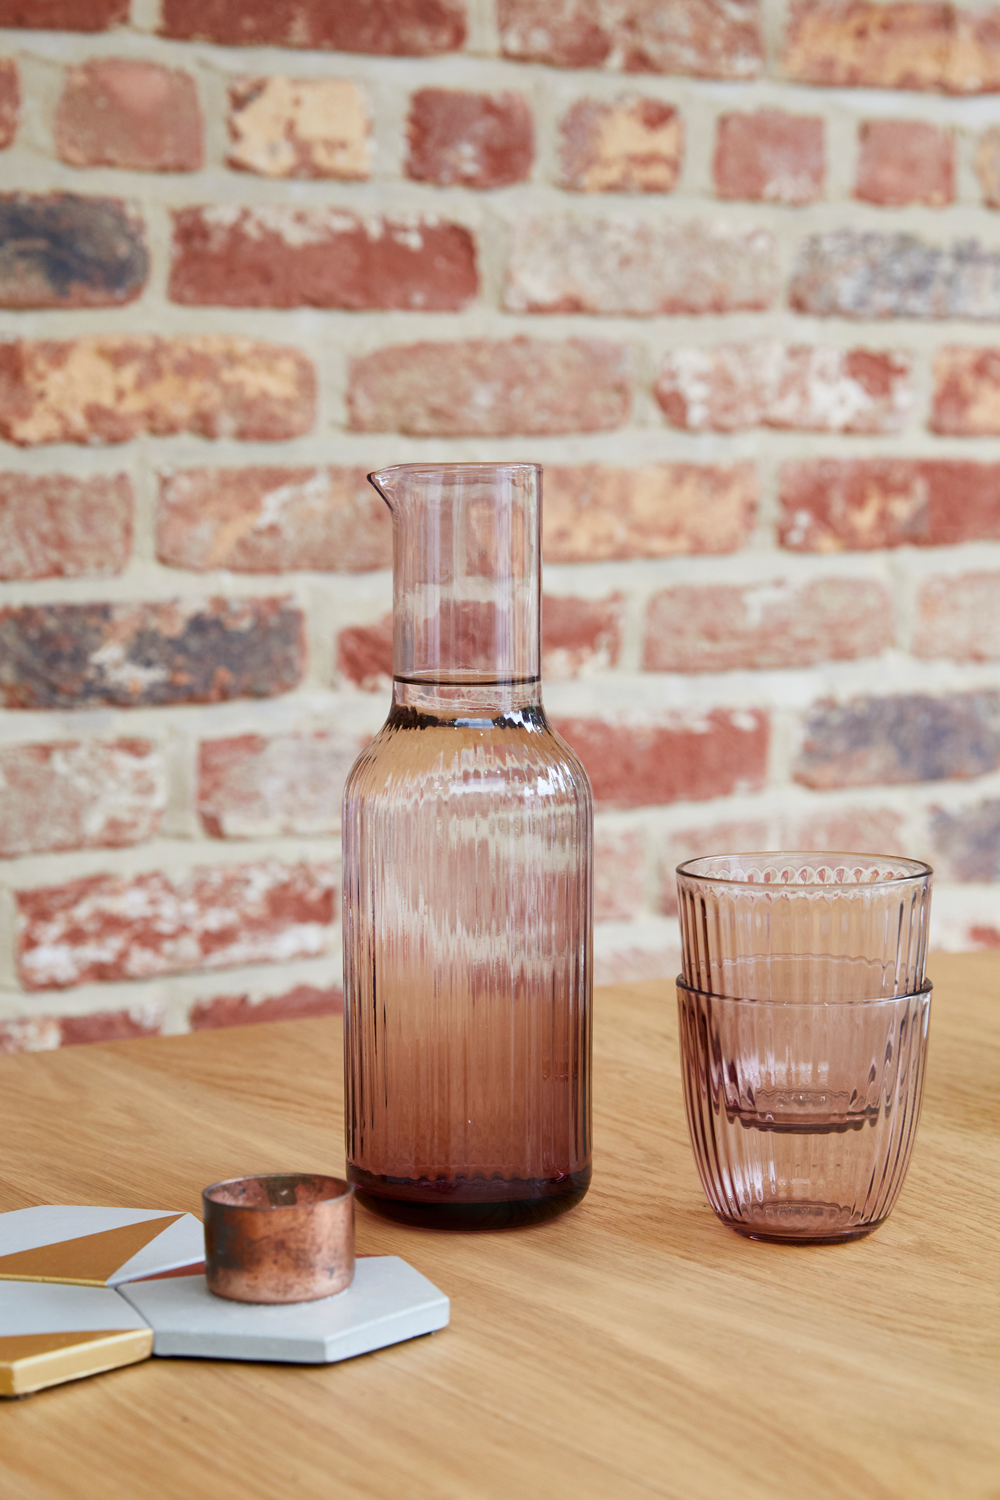 Pink glasses sit on oak dining table with exposed brick backdrop